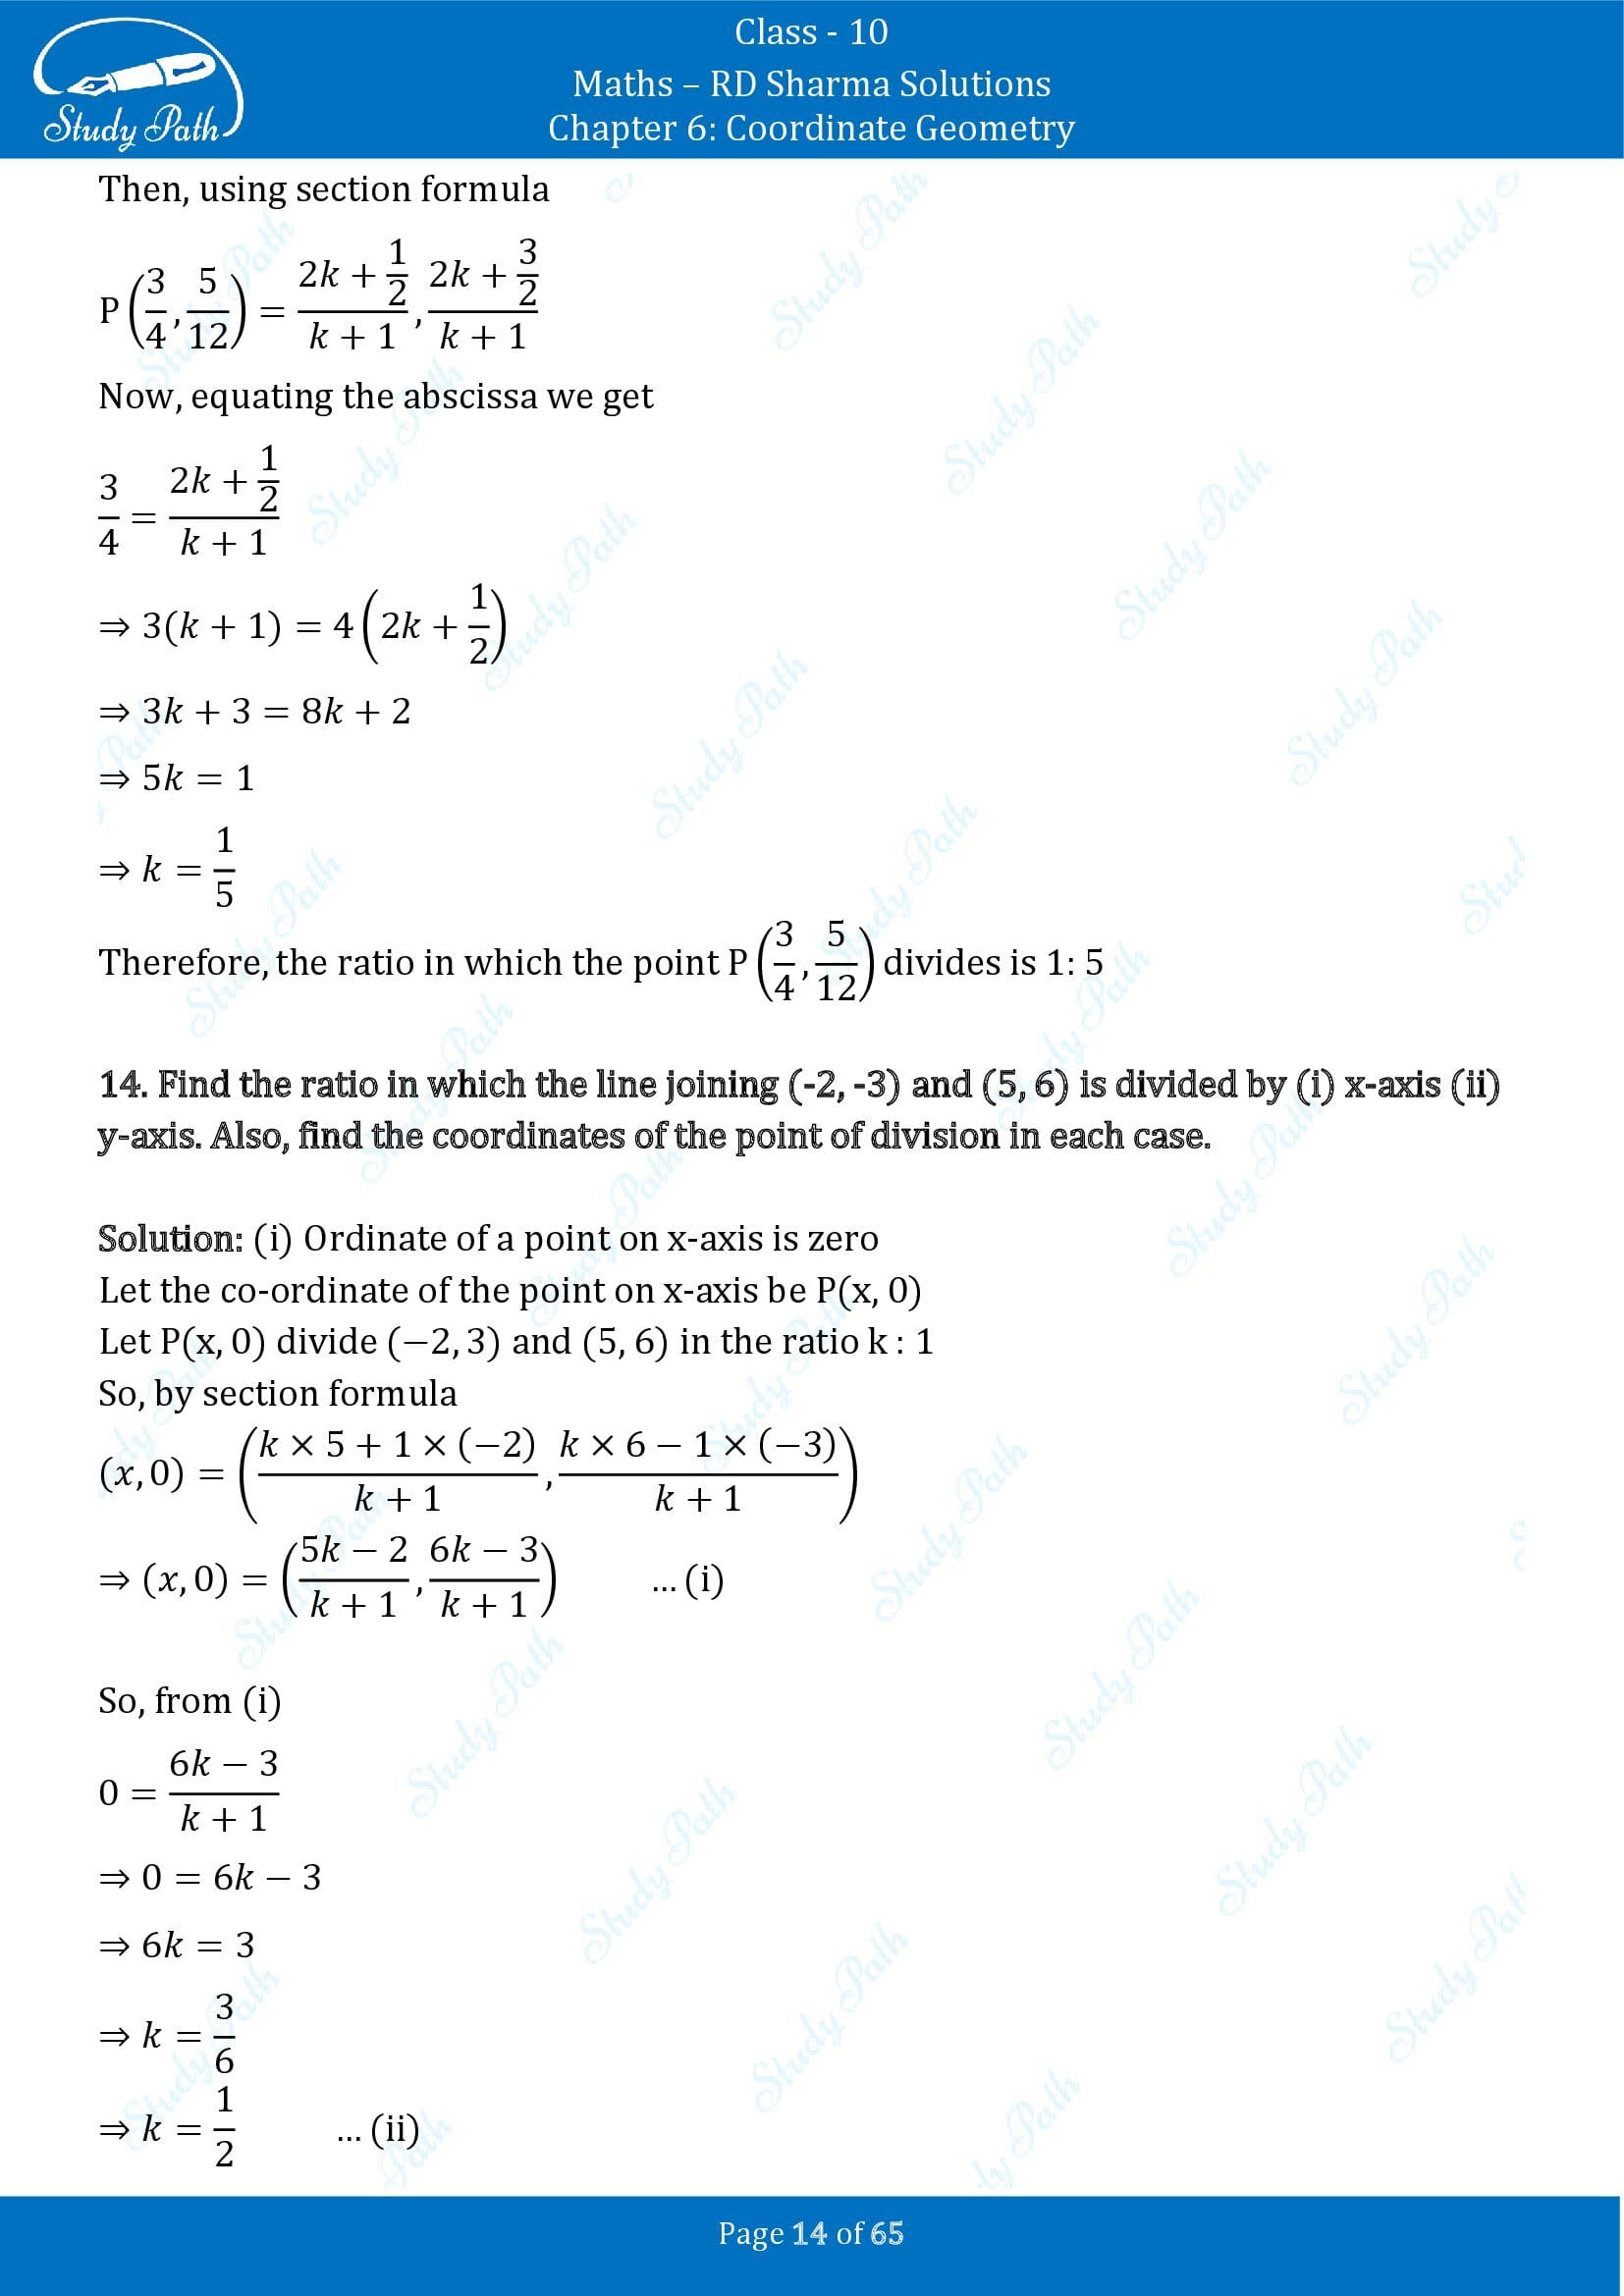 RD Sharma Solutions Class 10 Chapter 6 Coordinate Geometry Exercise 6.3 00014